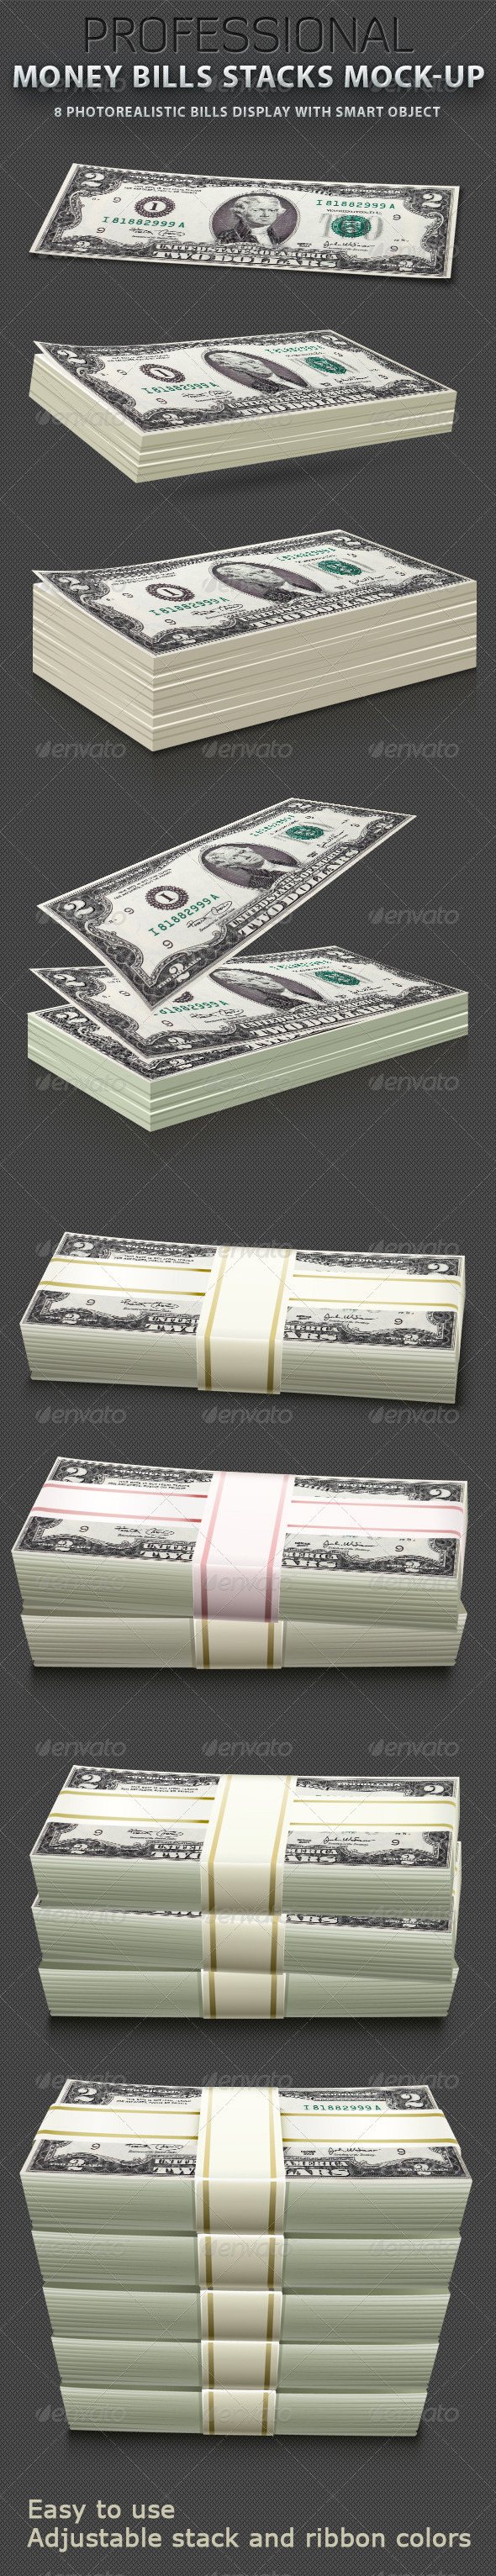 Download Money Mockup Graphics Designs Templates From Graphicriver